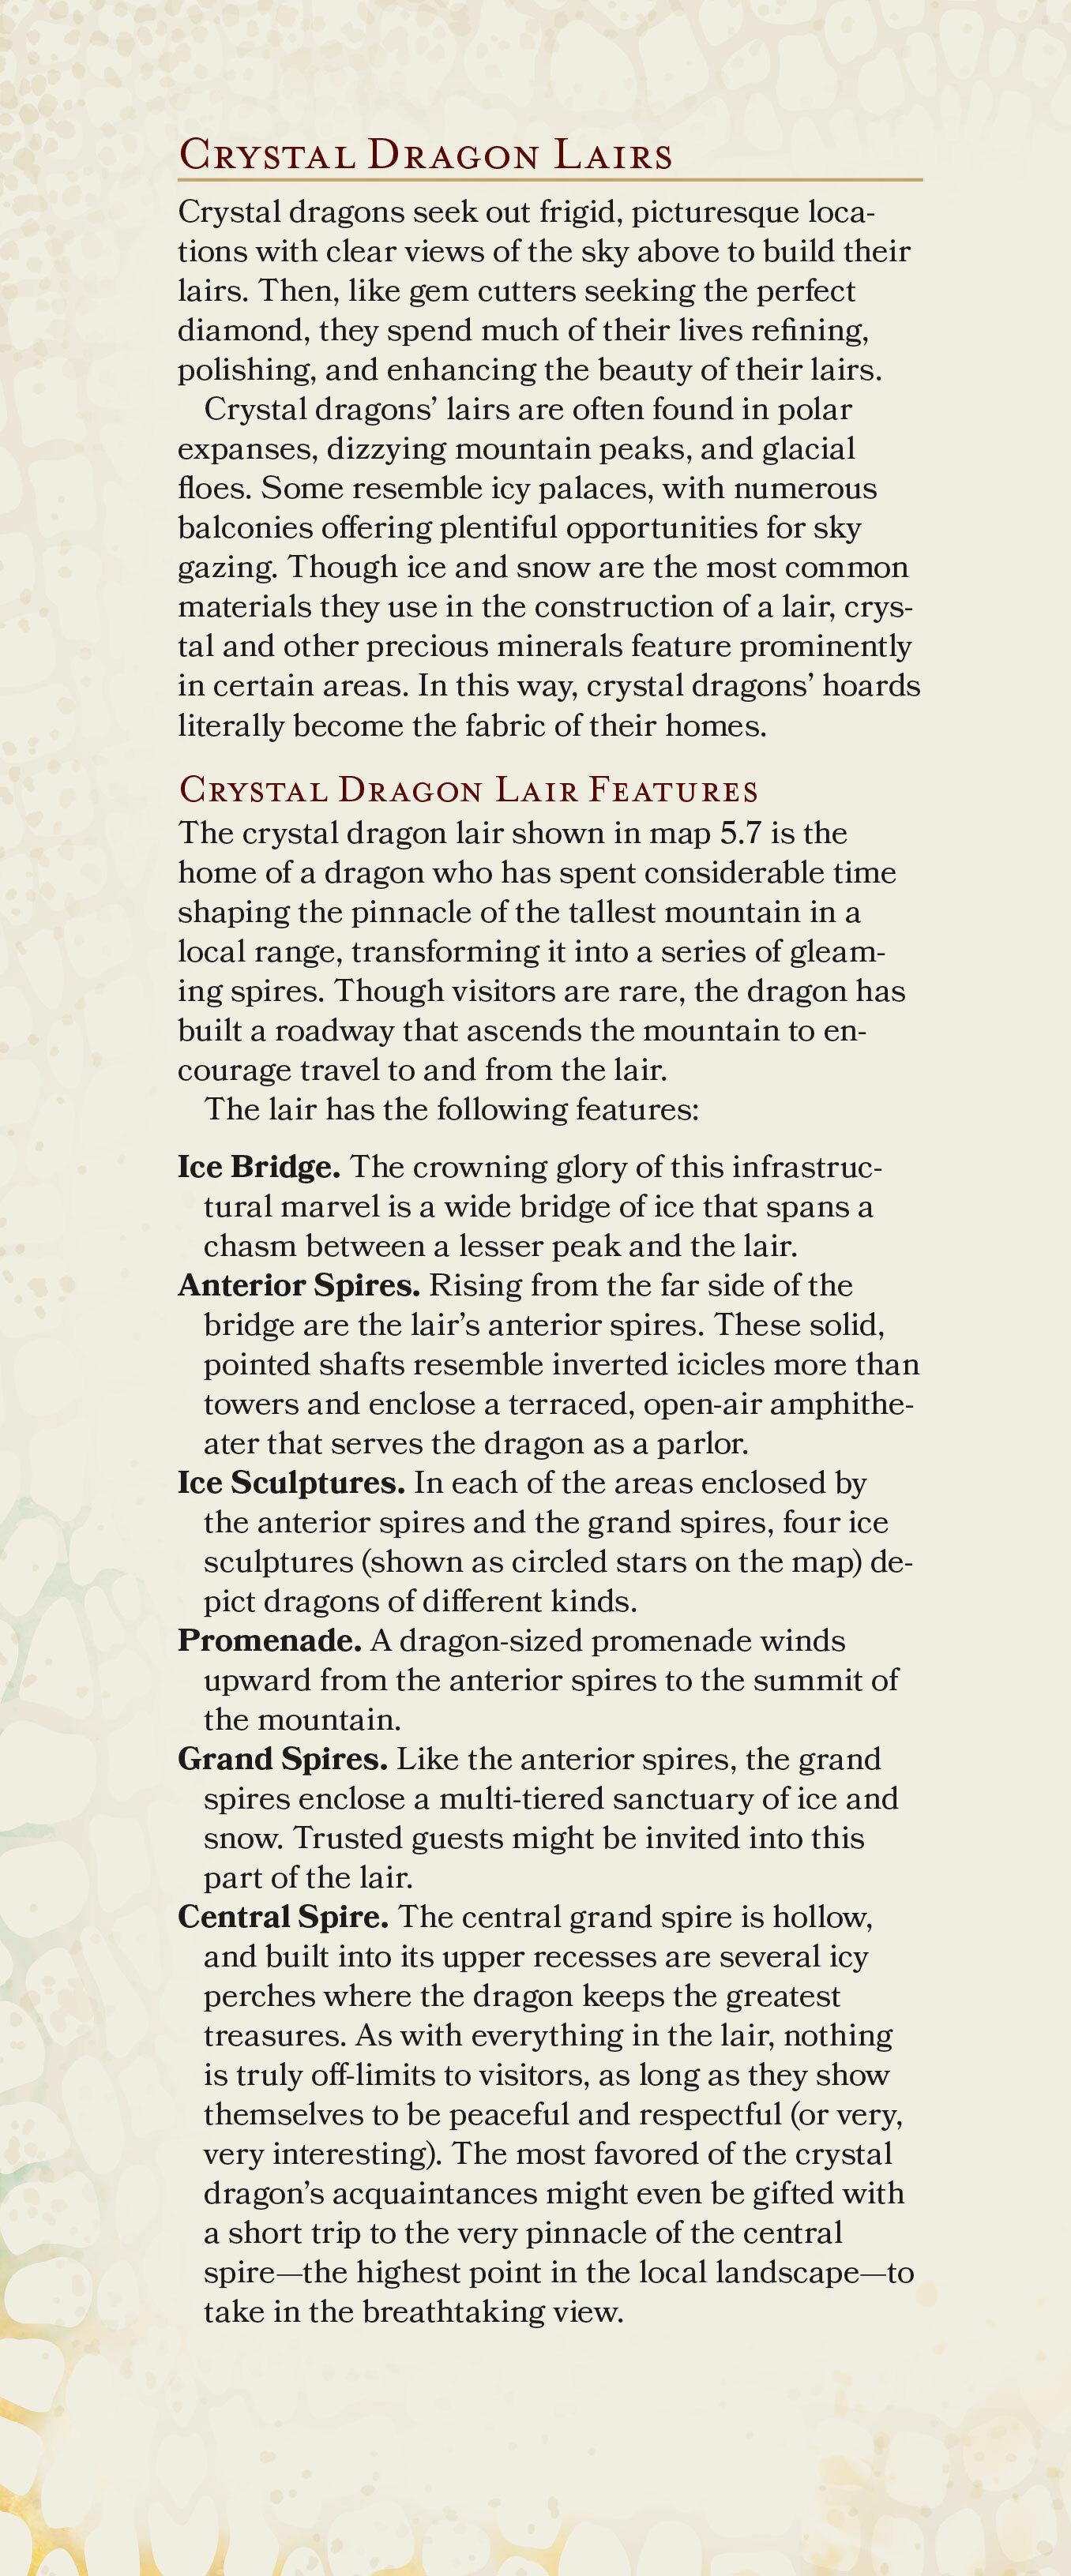 Crystal dragons tend to be less hostile than other gem dragons, but that doesn't necessarily mean they're friendly.